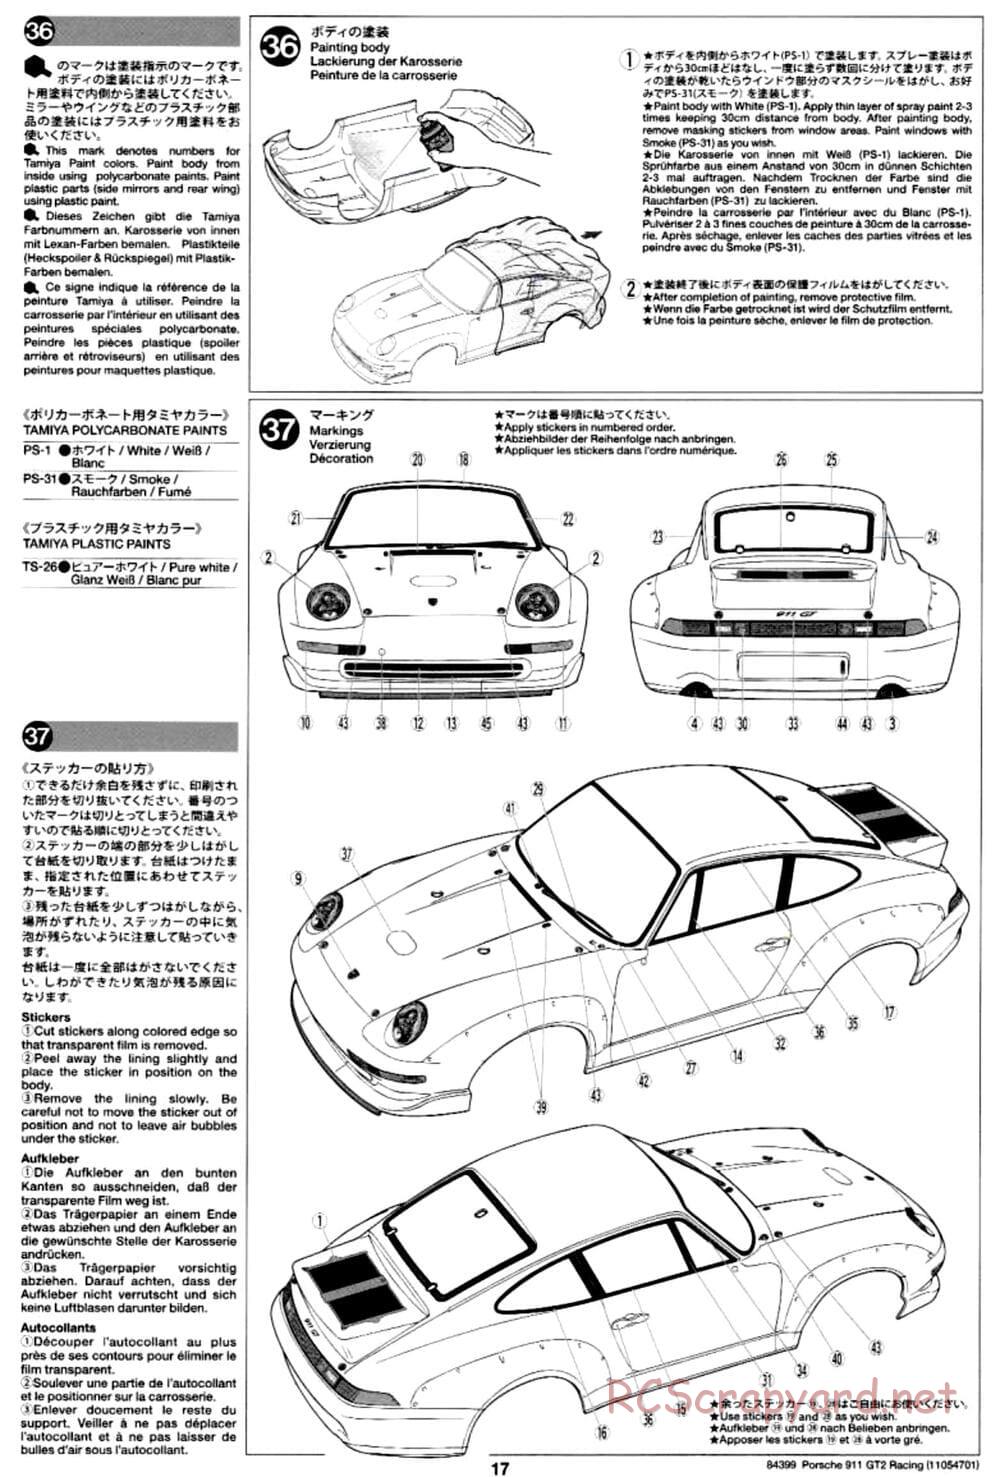 Tamiya - Porsche 911 GT2 Racing - TA02SW Chassis - Manual - Page 17